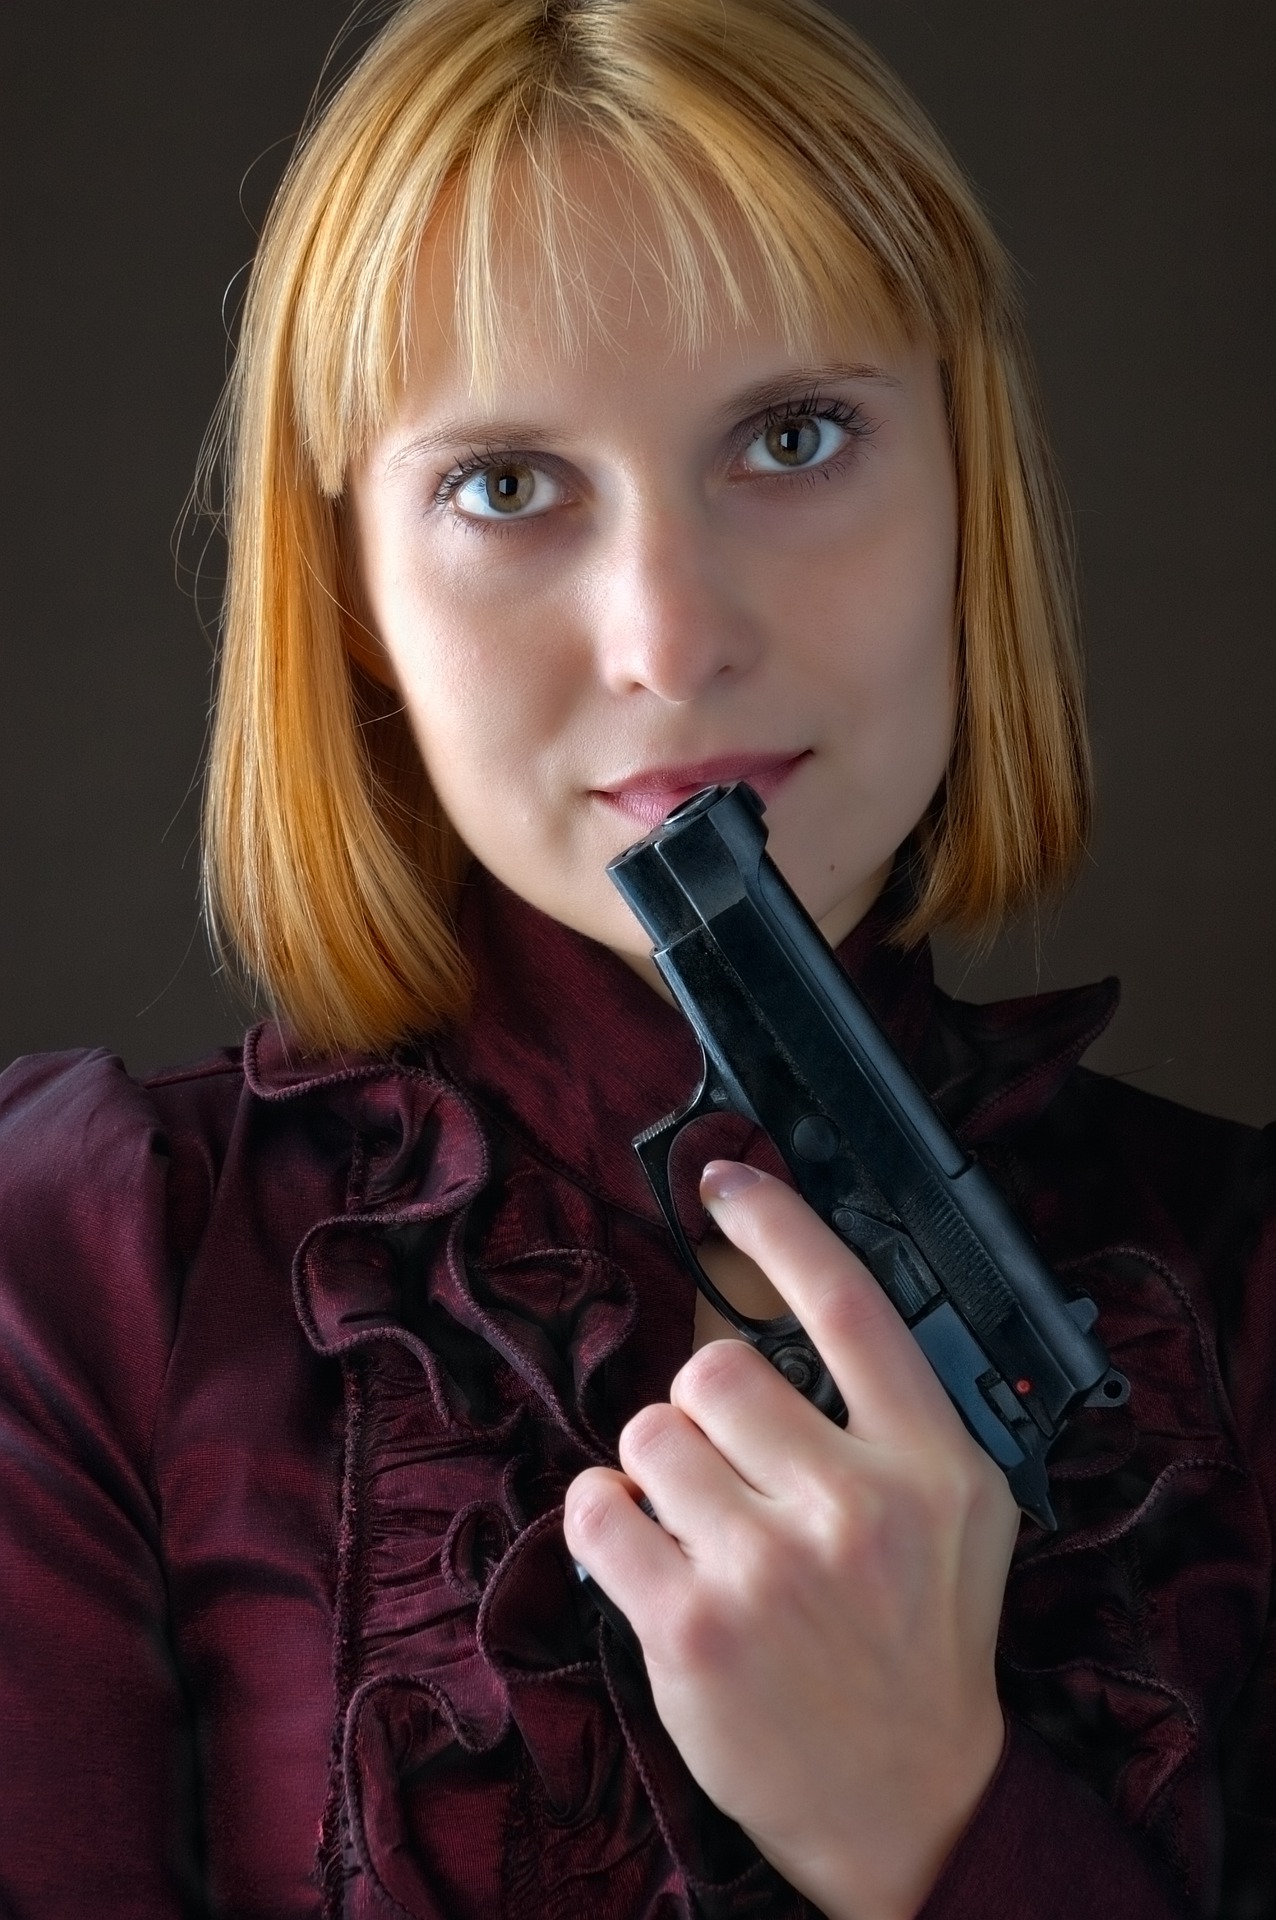 girl holding firearm incorrectly, never put your finger on the trigger until you are ready to shoot